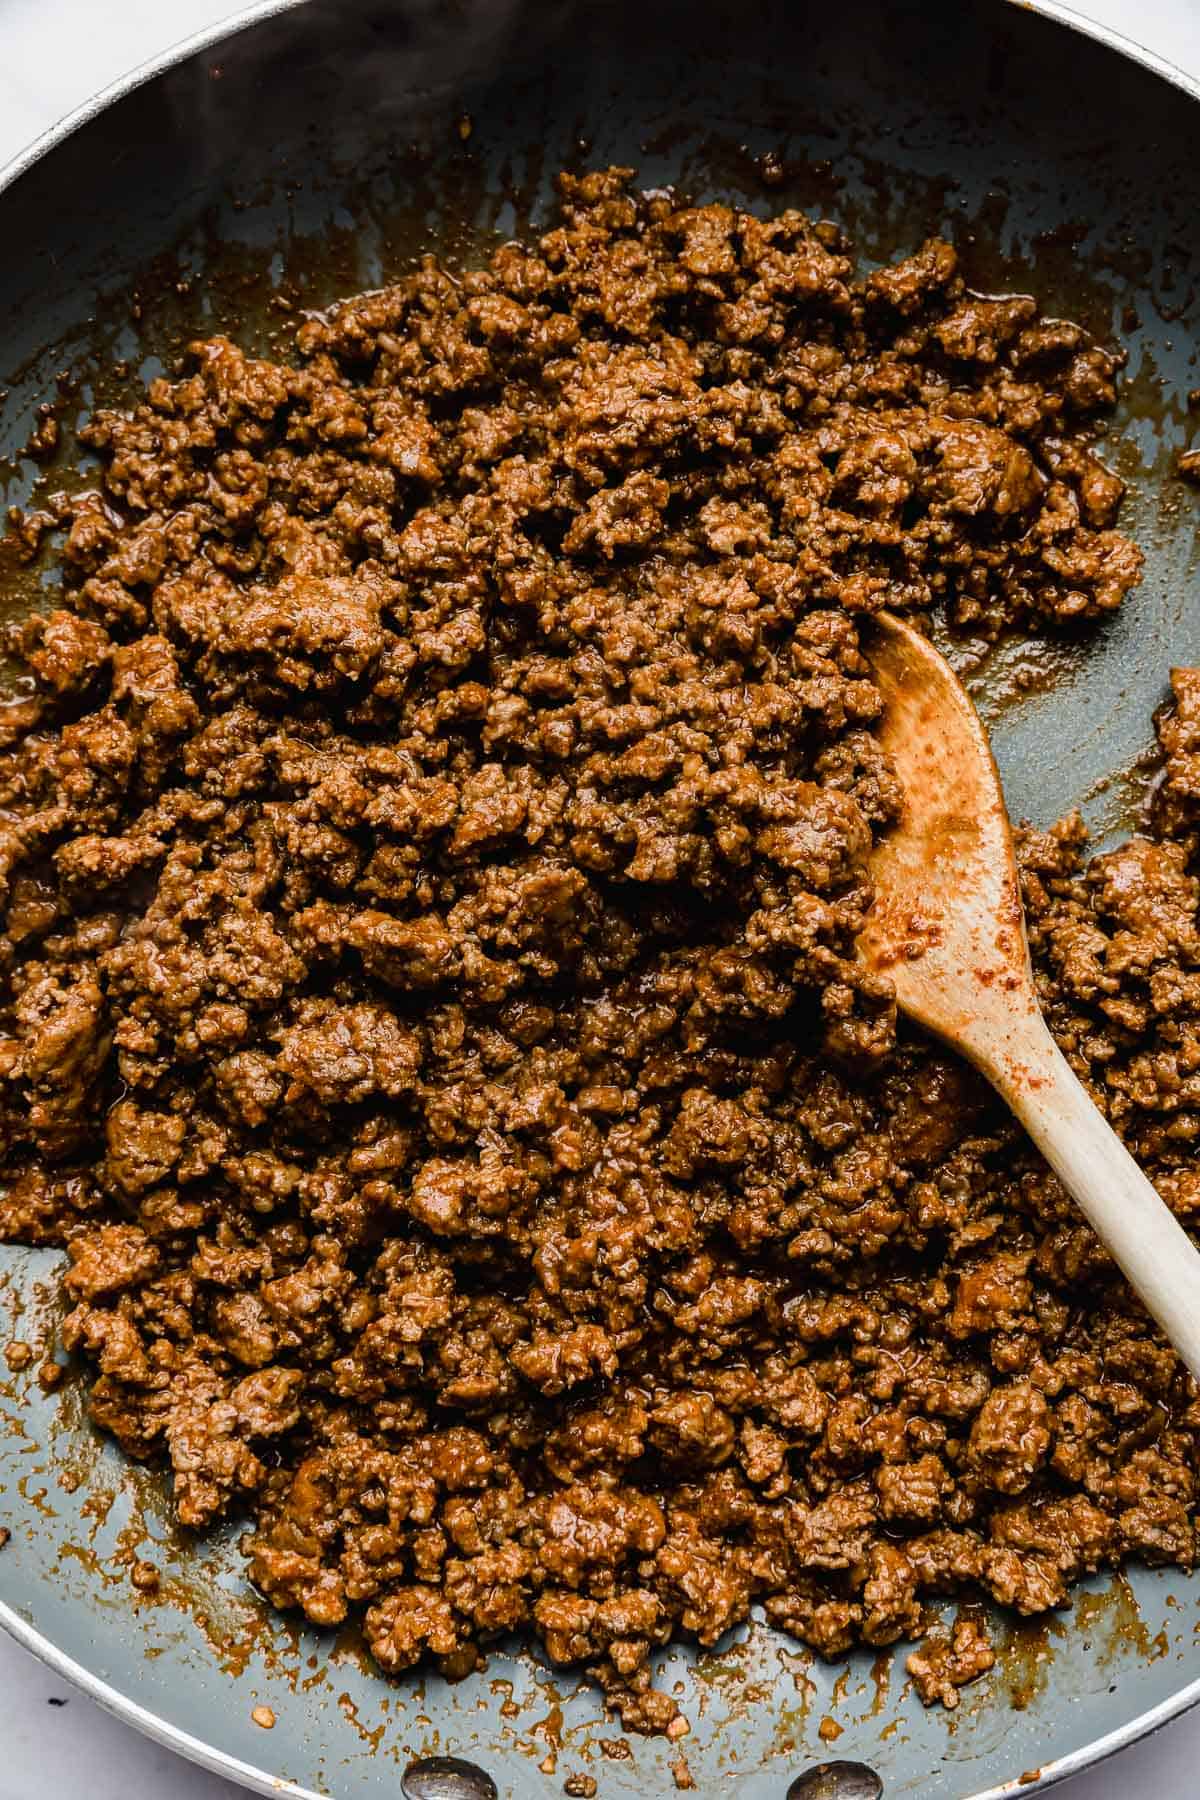 Ground beef mixed with taco seasoning in a grey skillet.